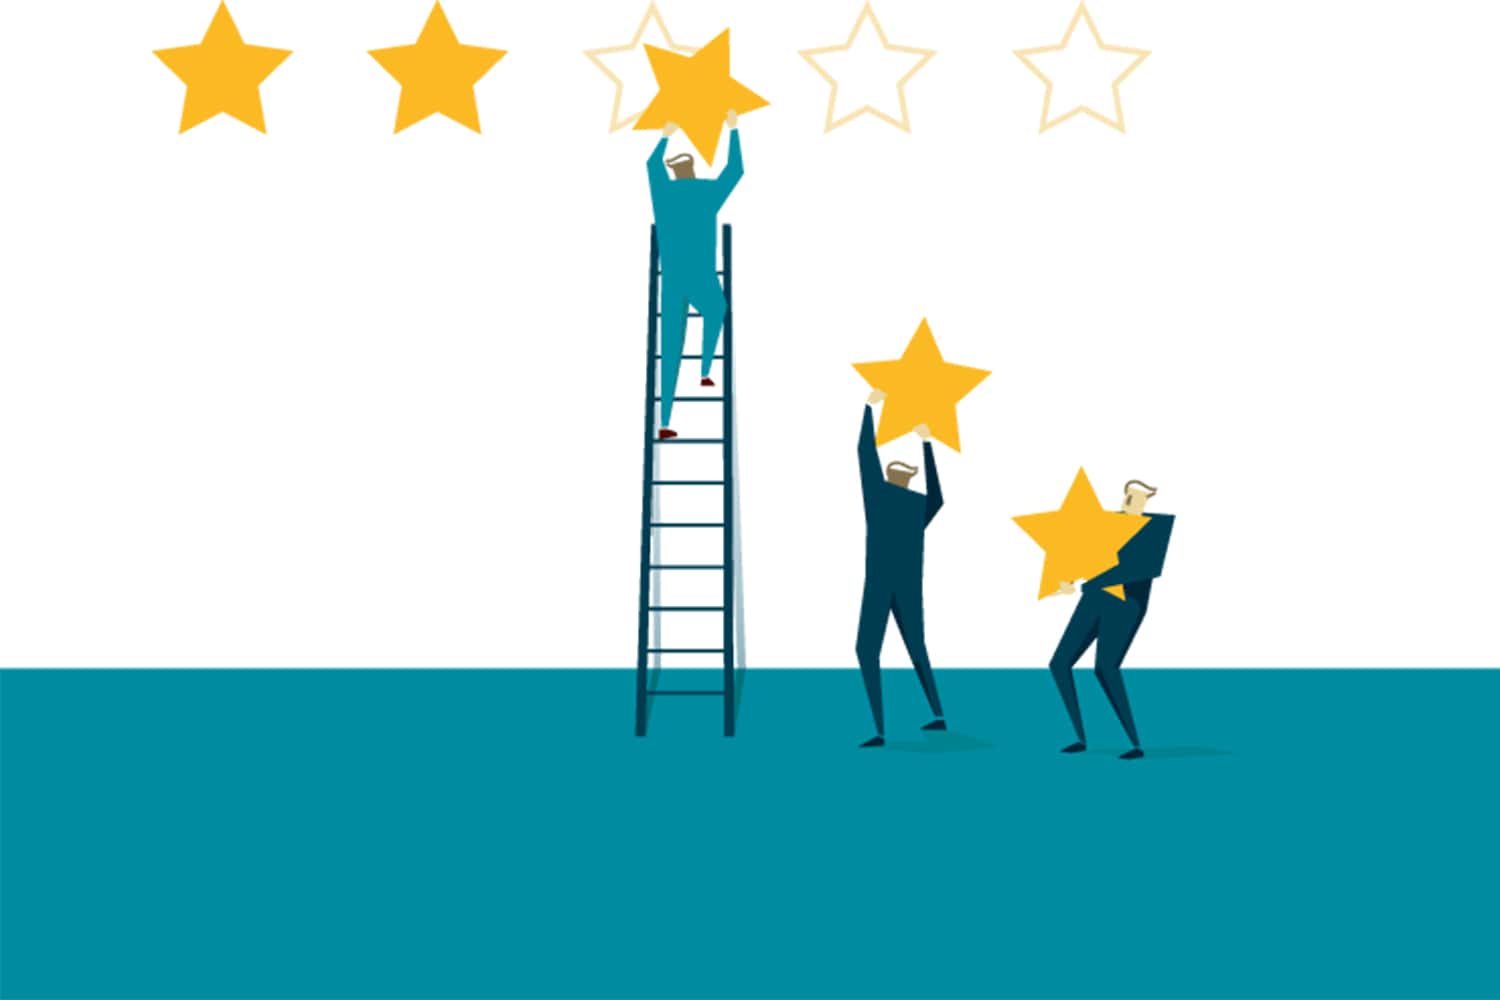 graphic of business people in suits standing on a ladder to hang up gold stars